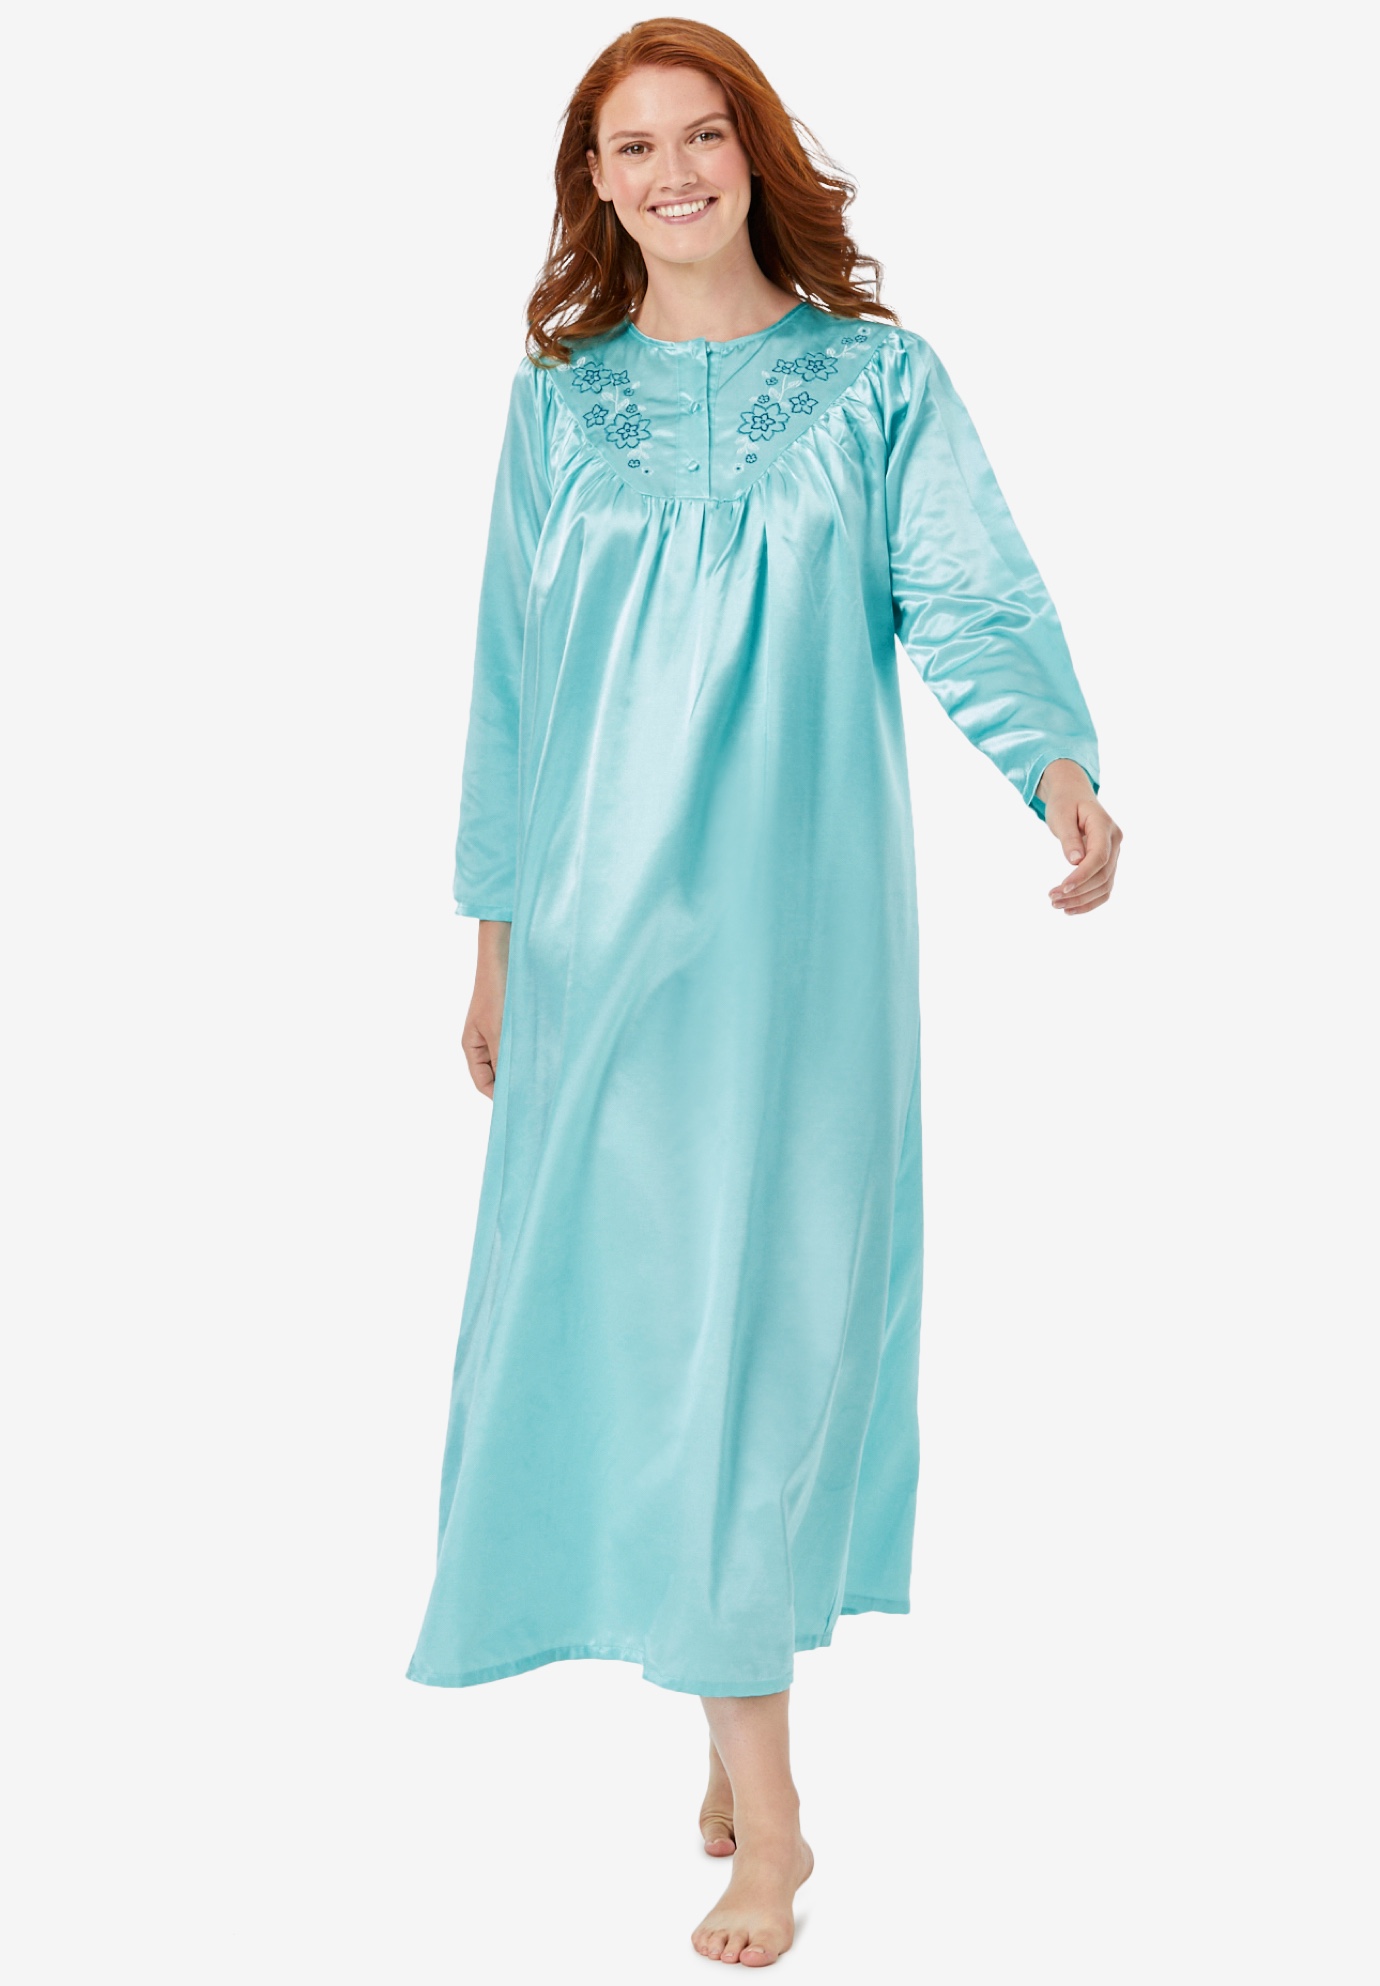 Embroidered Bib Brushed Satin Nightgown | Woman Within